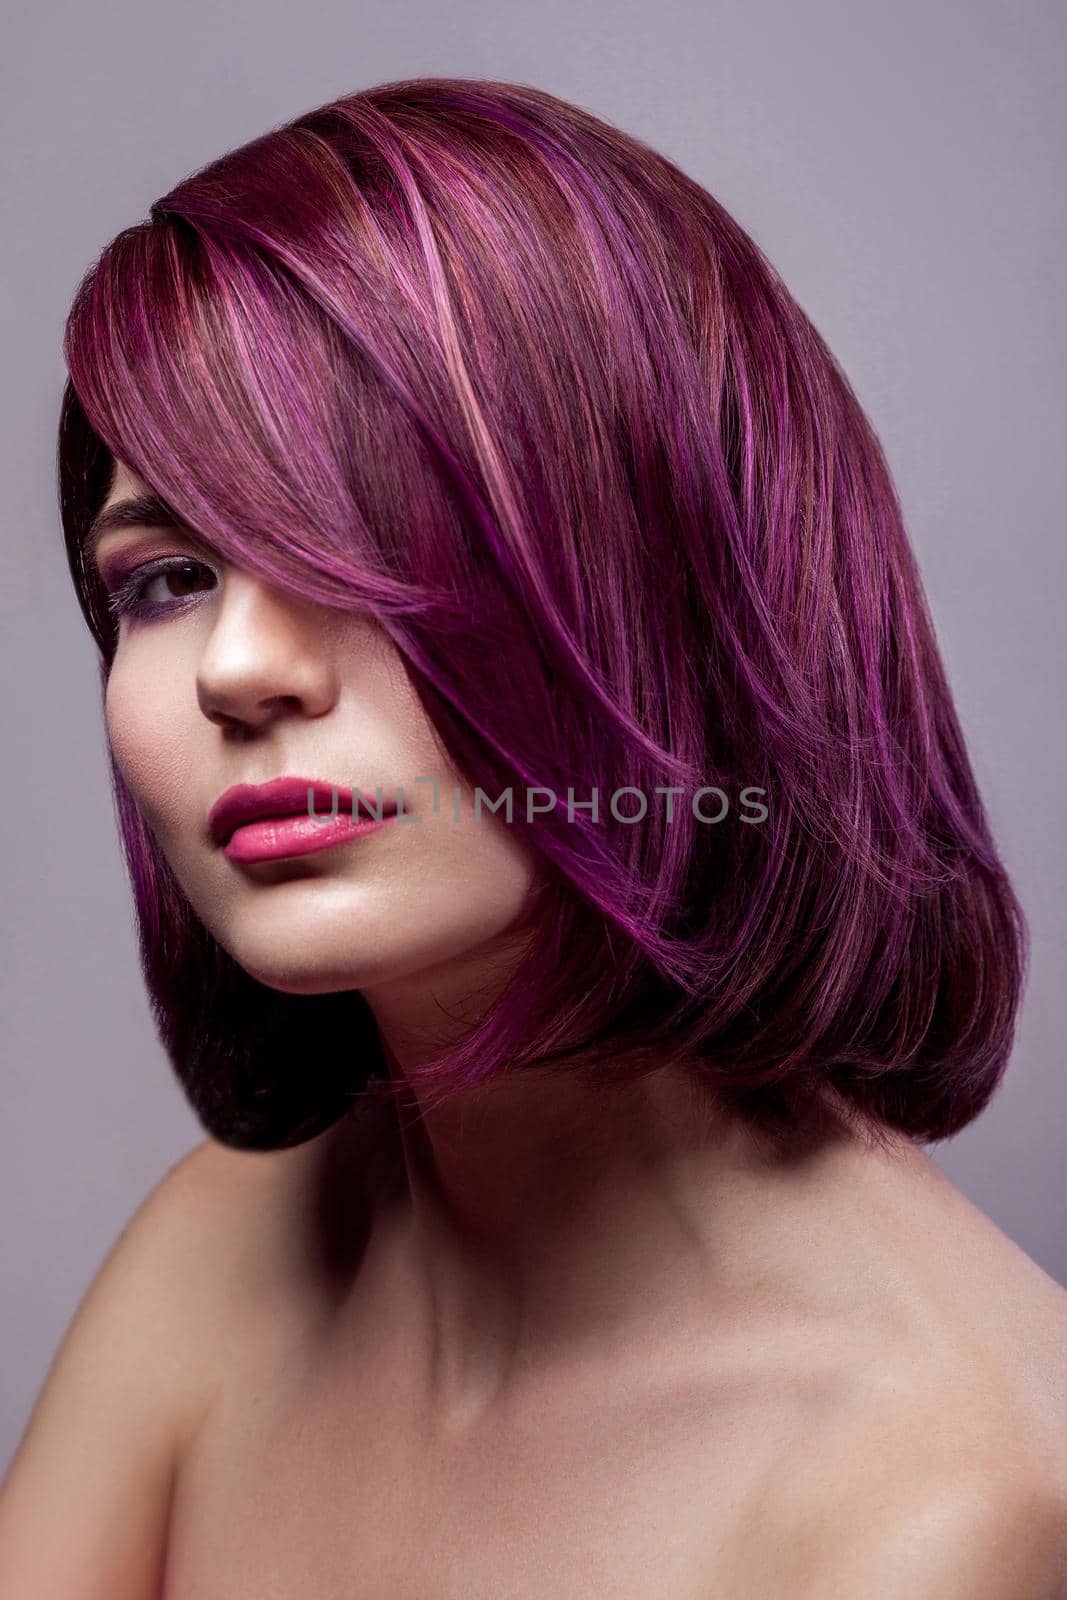 Portrait of fashion model woman with short purple colored hairstyle and makeup looking at camera. by Khosro1